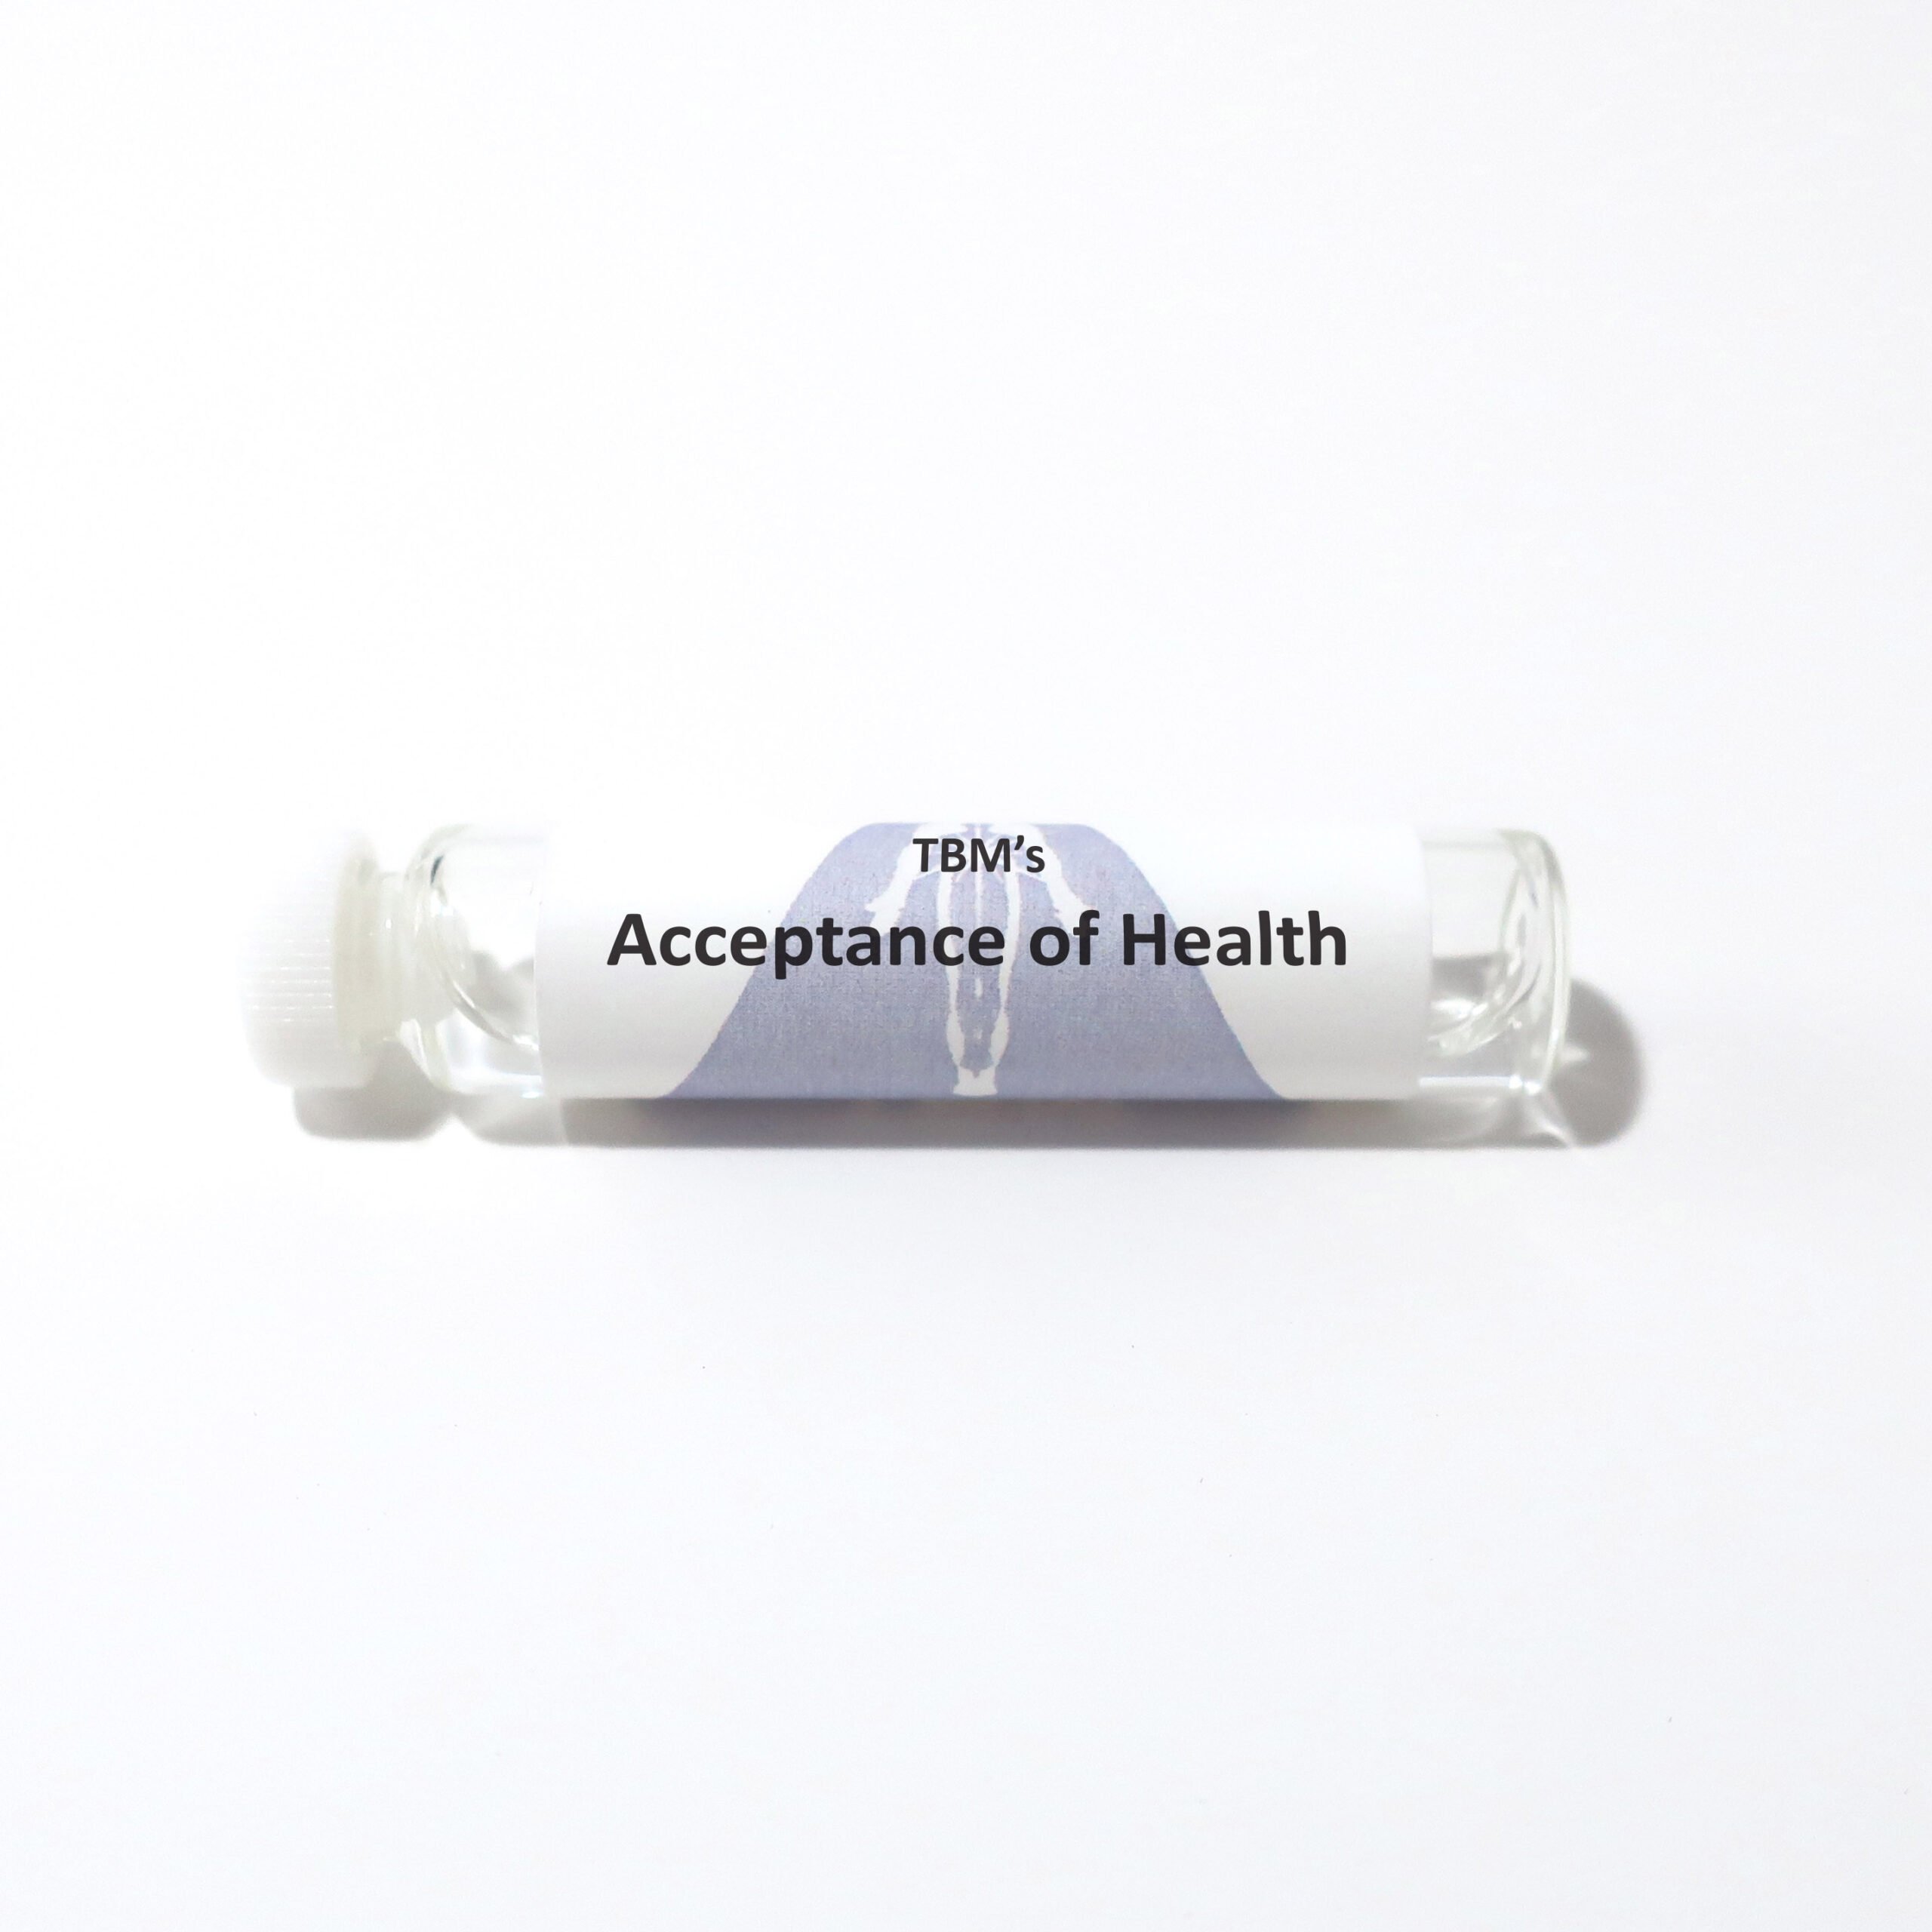 Acceptance of Health